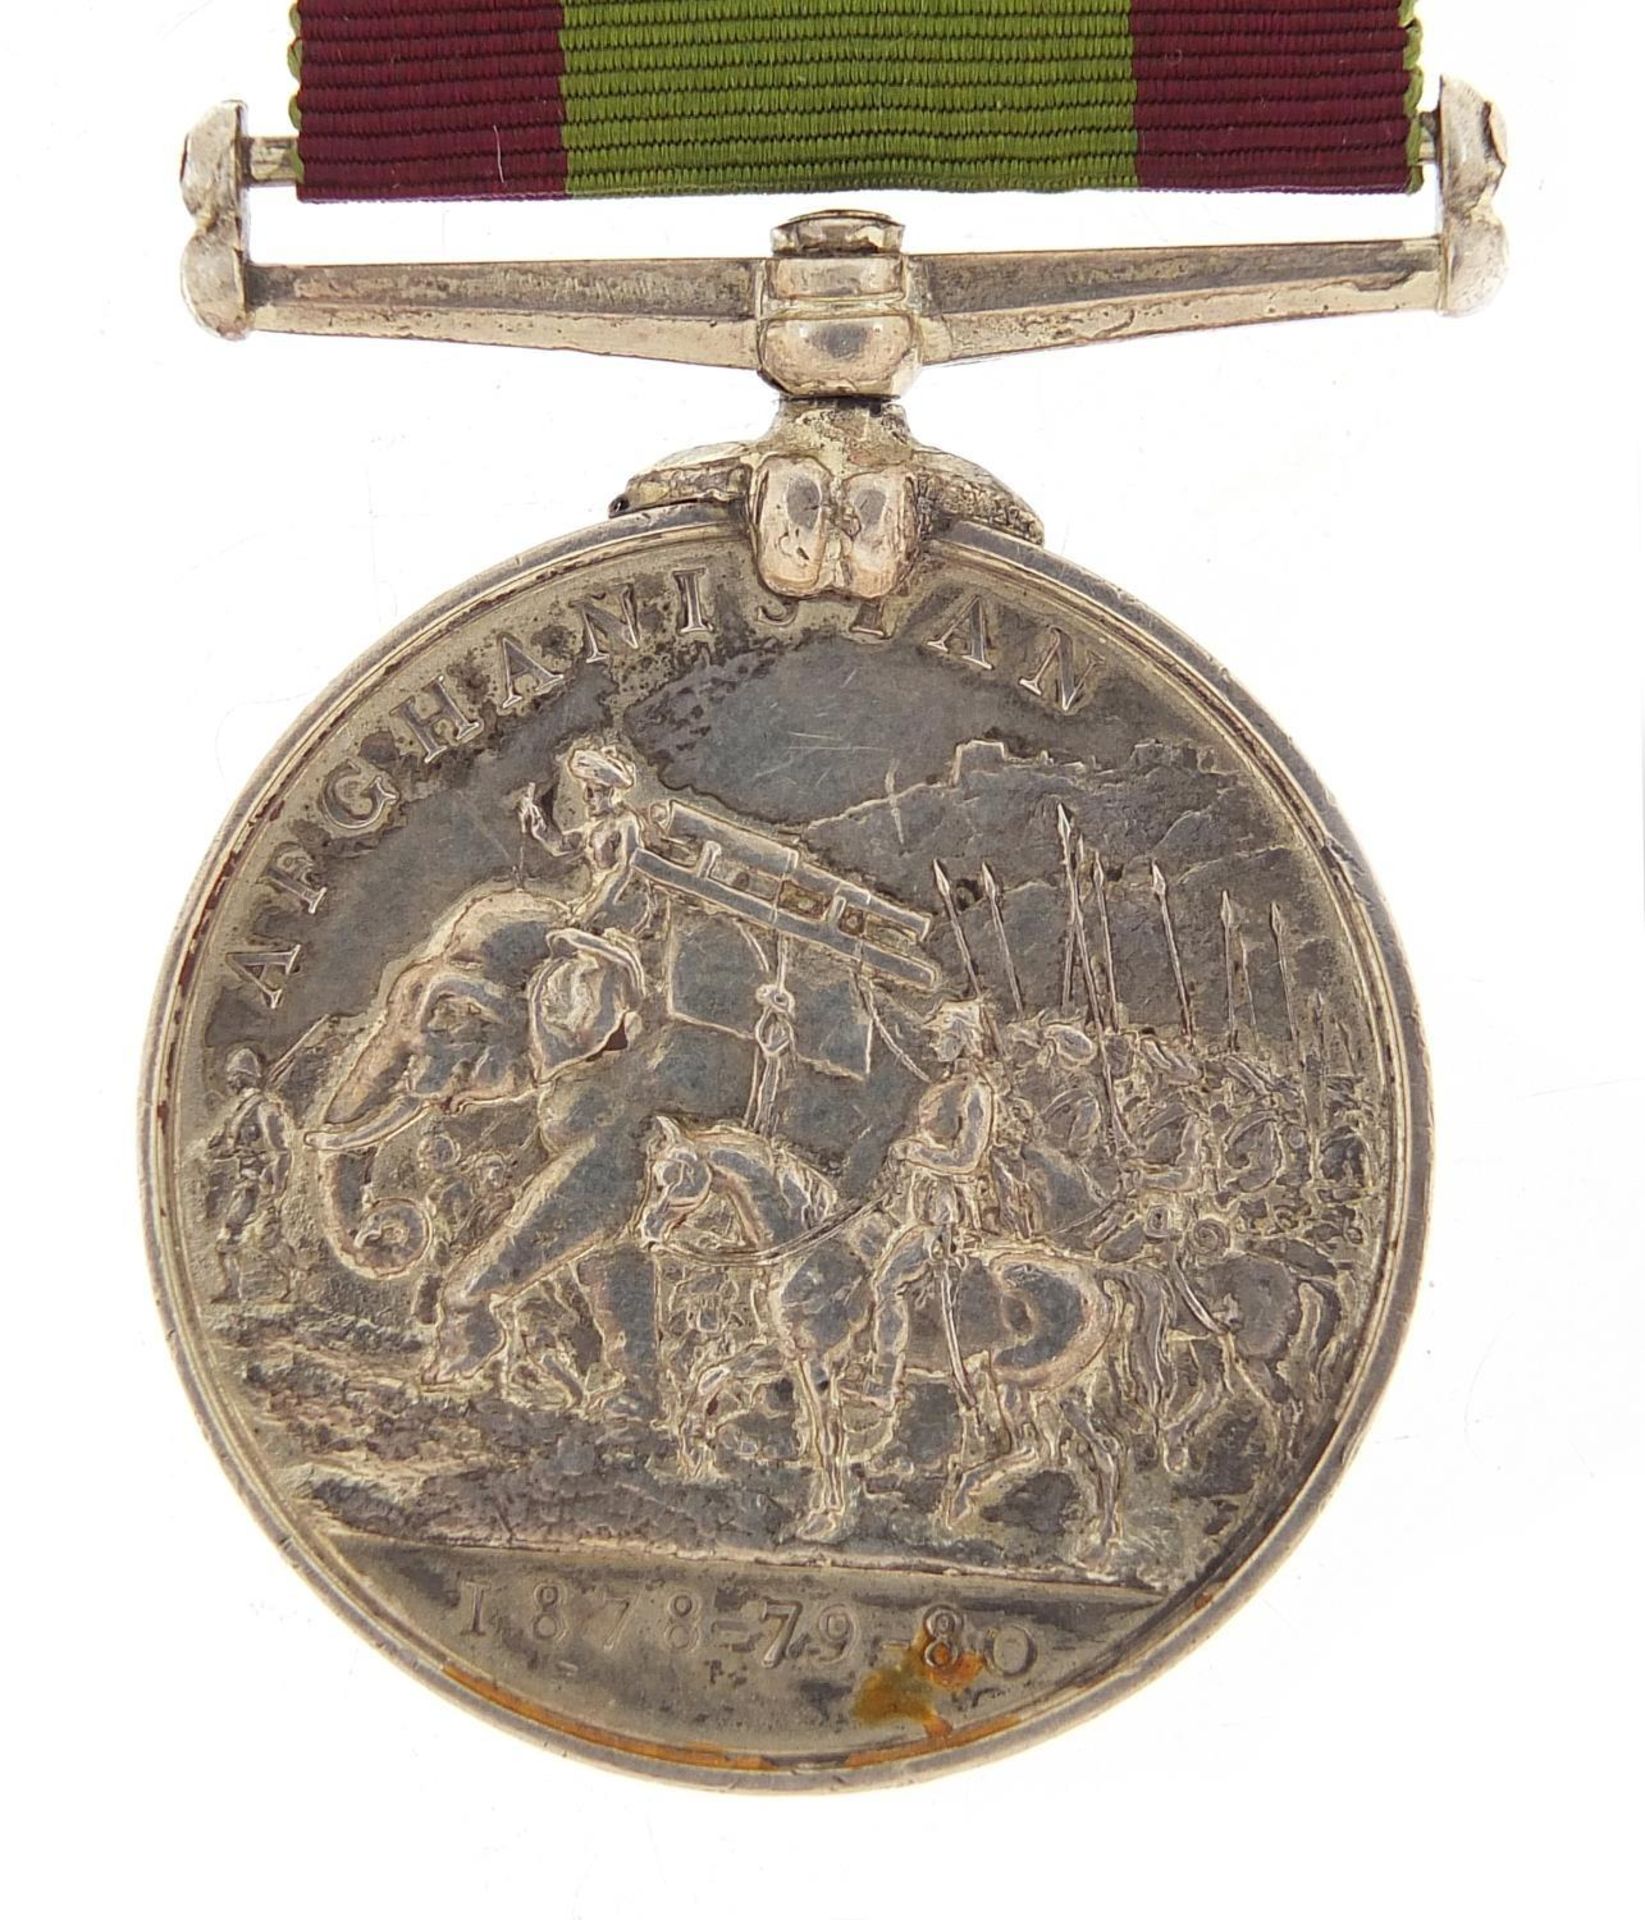 Victorian British military Afghanistan medal awarded to 1ST.CORPLG.ASHMON.BO:SANDM - Image 4 of 4